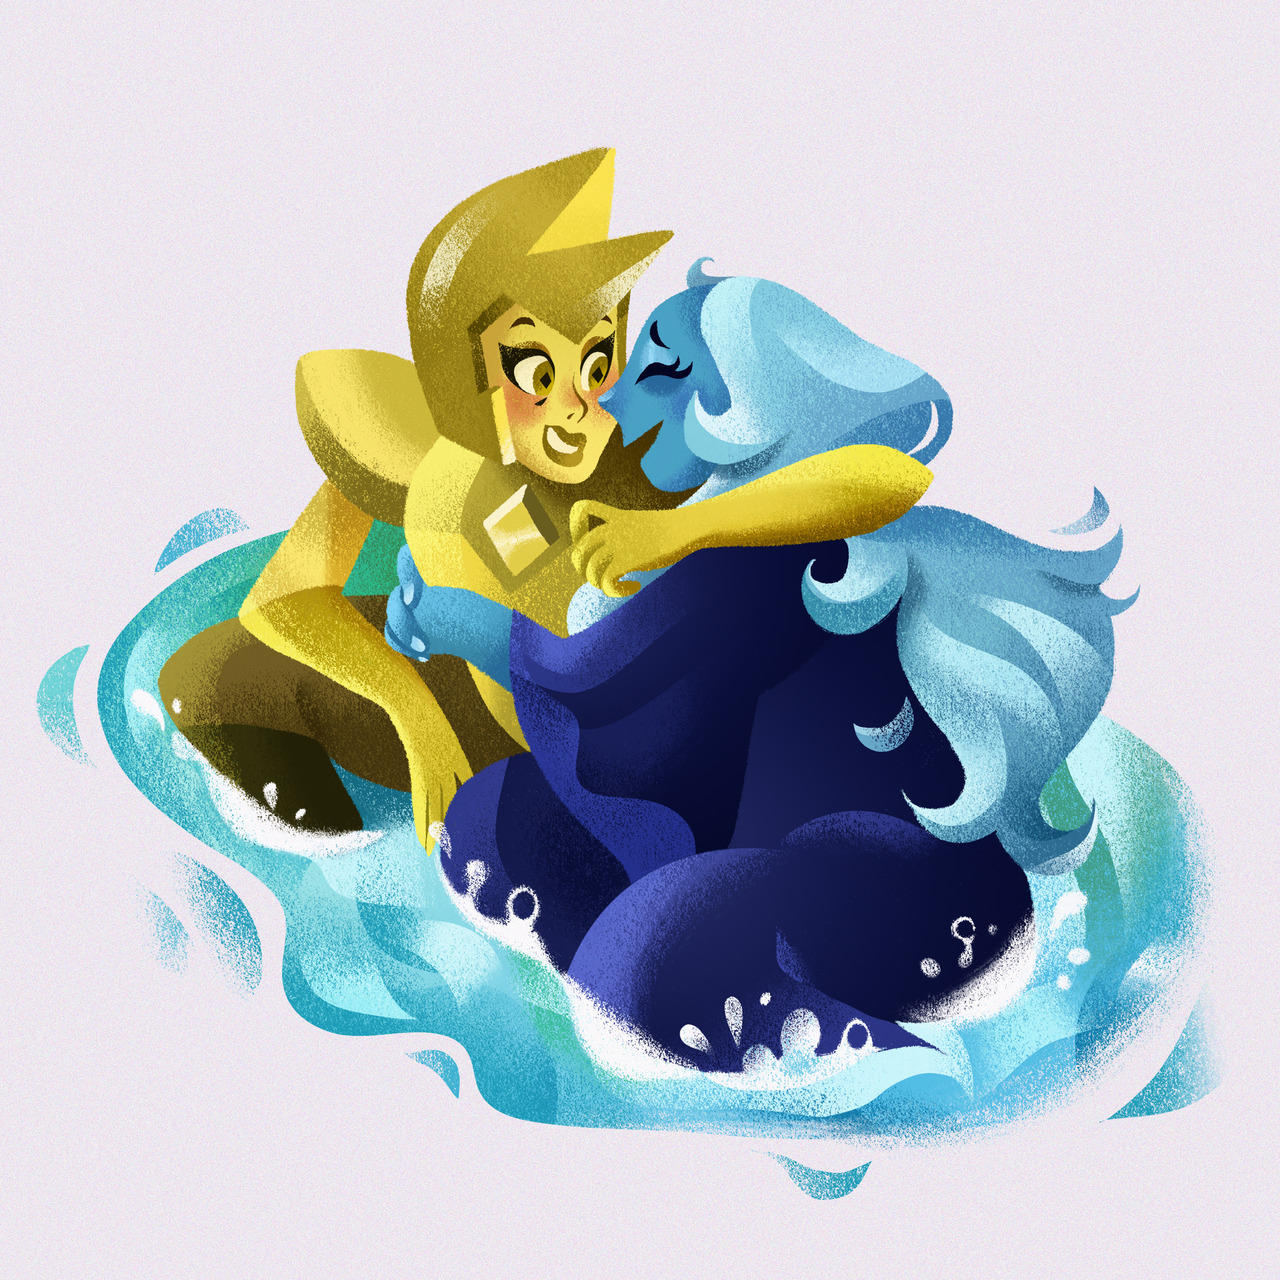 “She’s so strong, but so weak when it comes to Blue” They’re so cute together! Yellow’s apparently got jokes and Blue loves it!